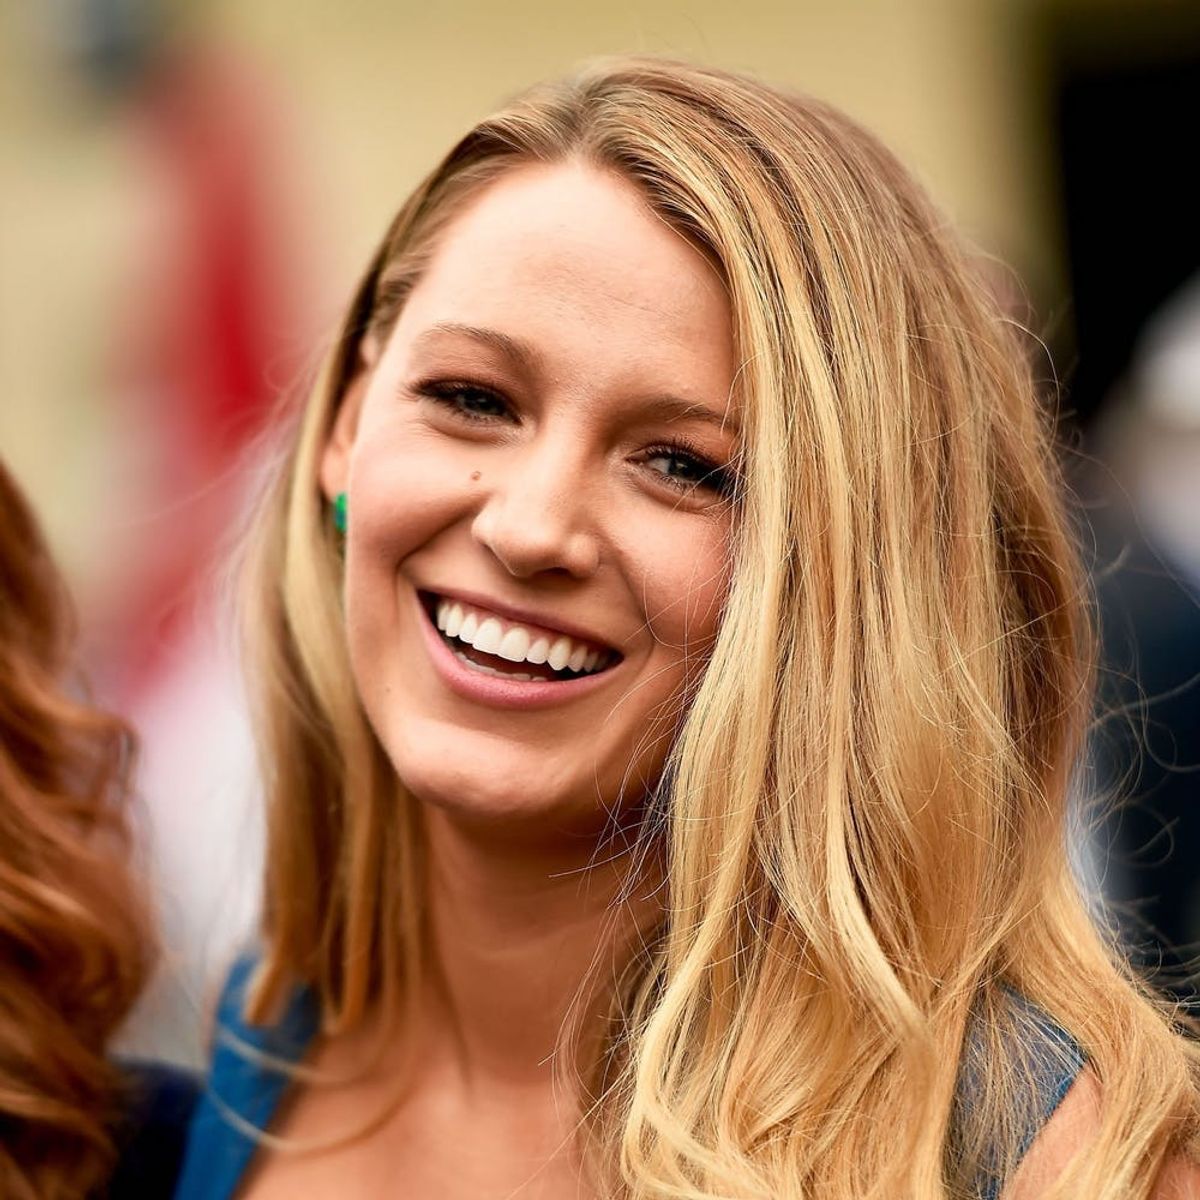 Blake Lively Is Twinning With Her Daughter James in This Sweet Childhood Snap